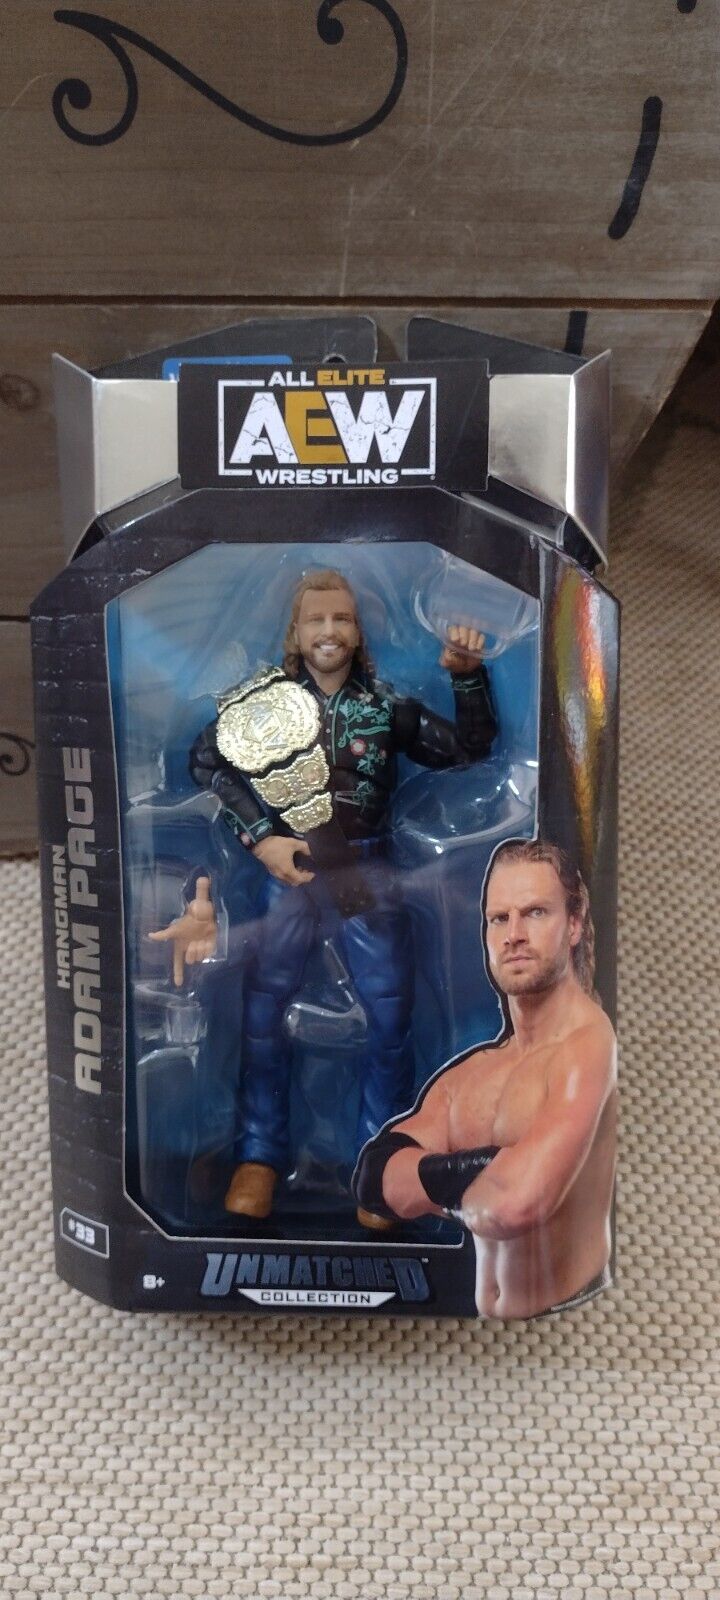 BN All Elite AEW Wrestling Hangman ADAM PAGE # 33 UNMATCHED CollECTION